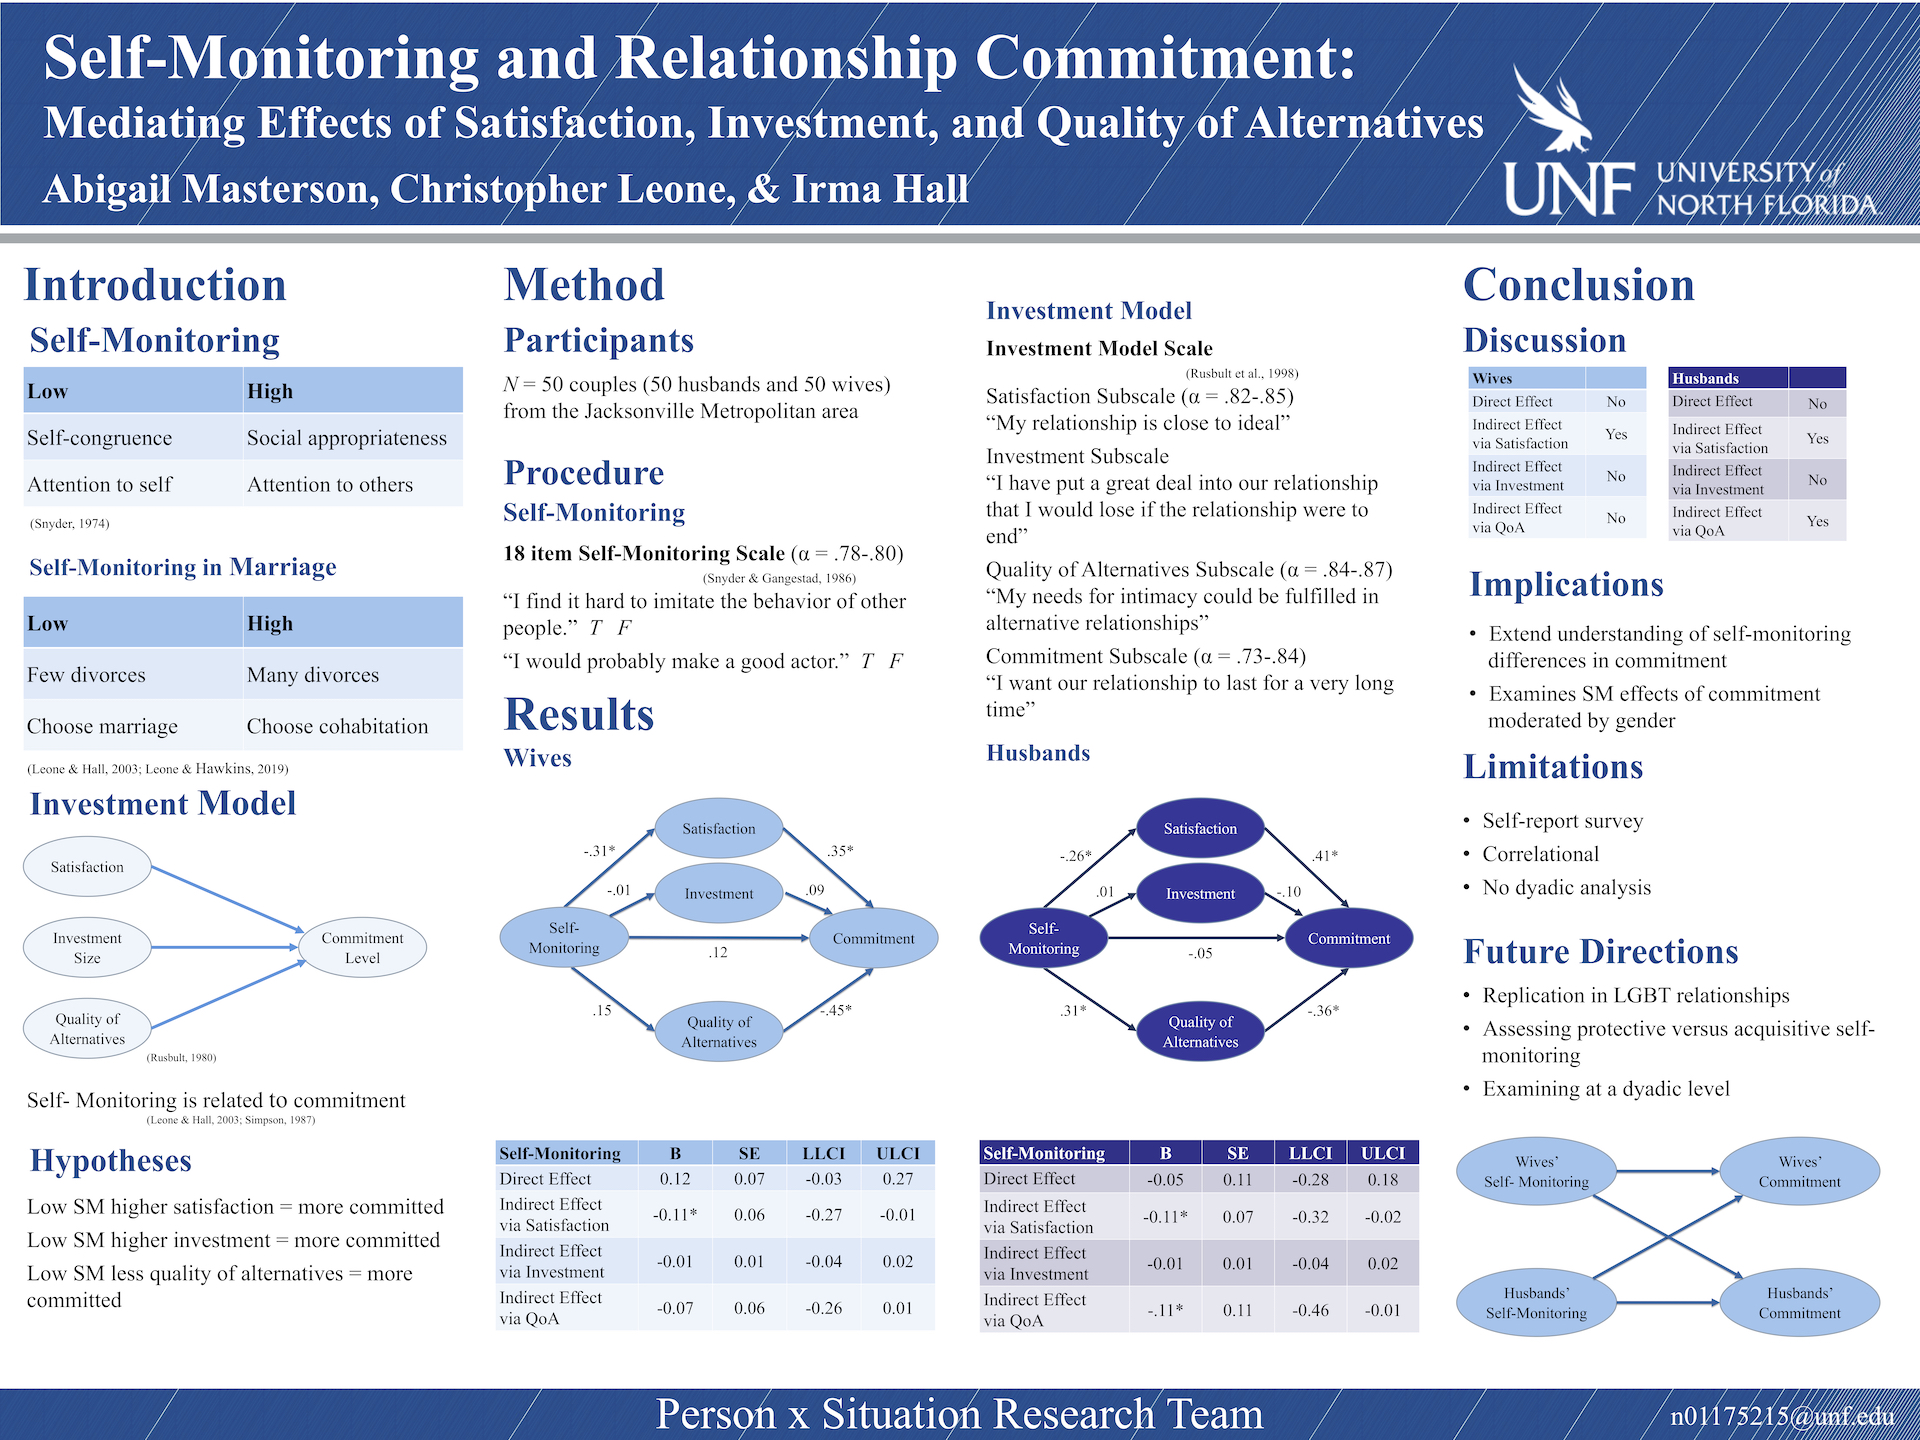 Self-Monitoring and Relationship Commitment: Mediating Effects of Satisfaction, Investment, and Quality of Alternatives